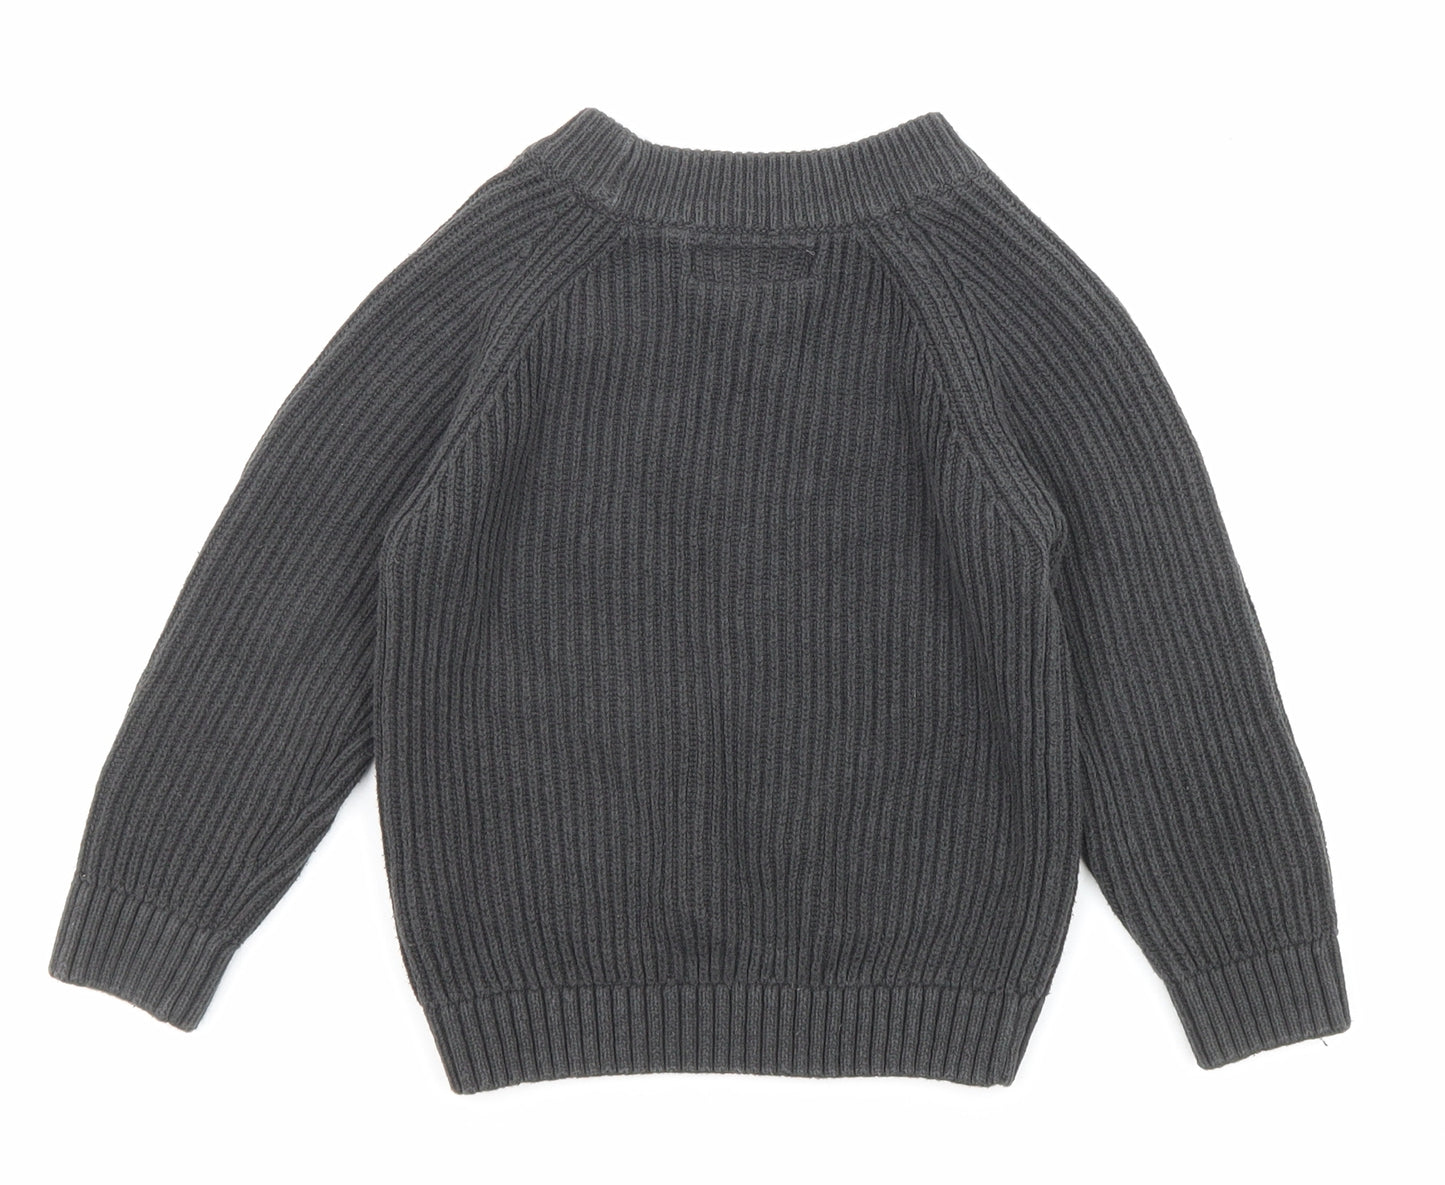 NEXT Boys Grey Round Neck Cotton Pullover Jumper Size 3 Years Pullover